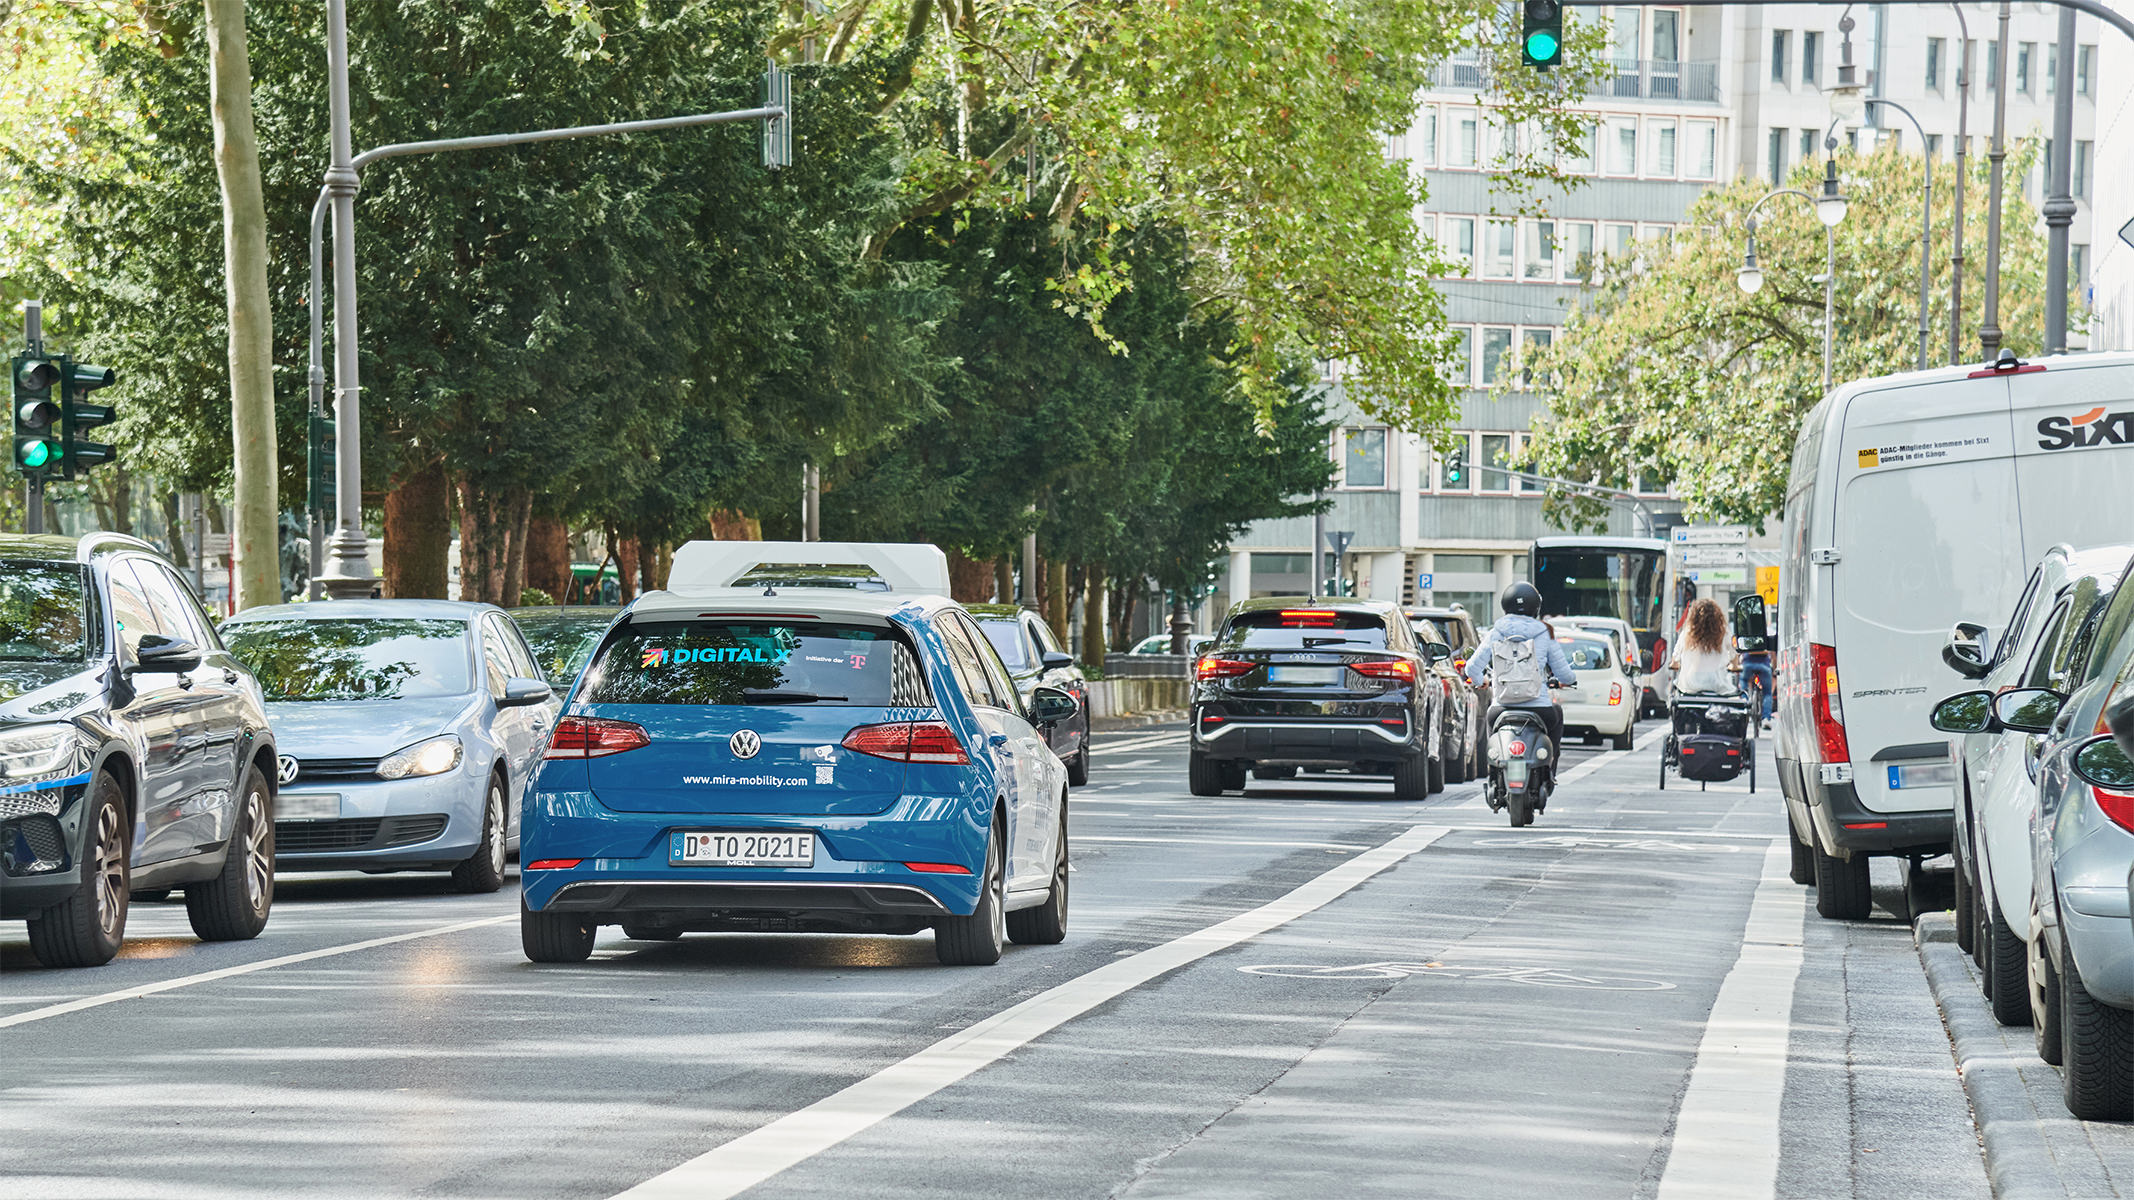 Remote-controlled driving in the city: a major milestone in future mobility